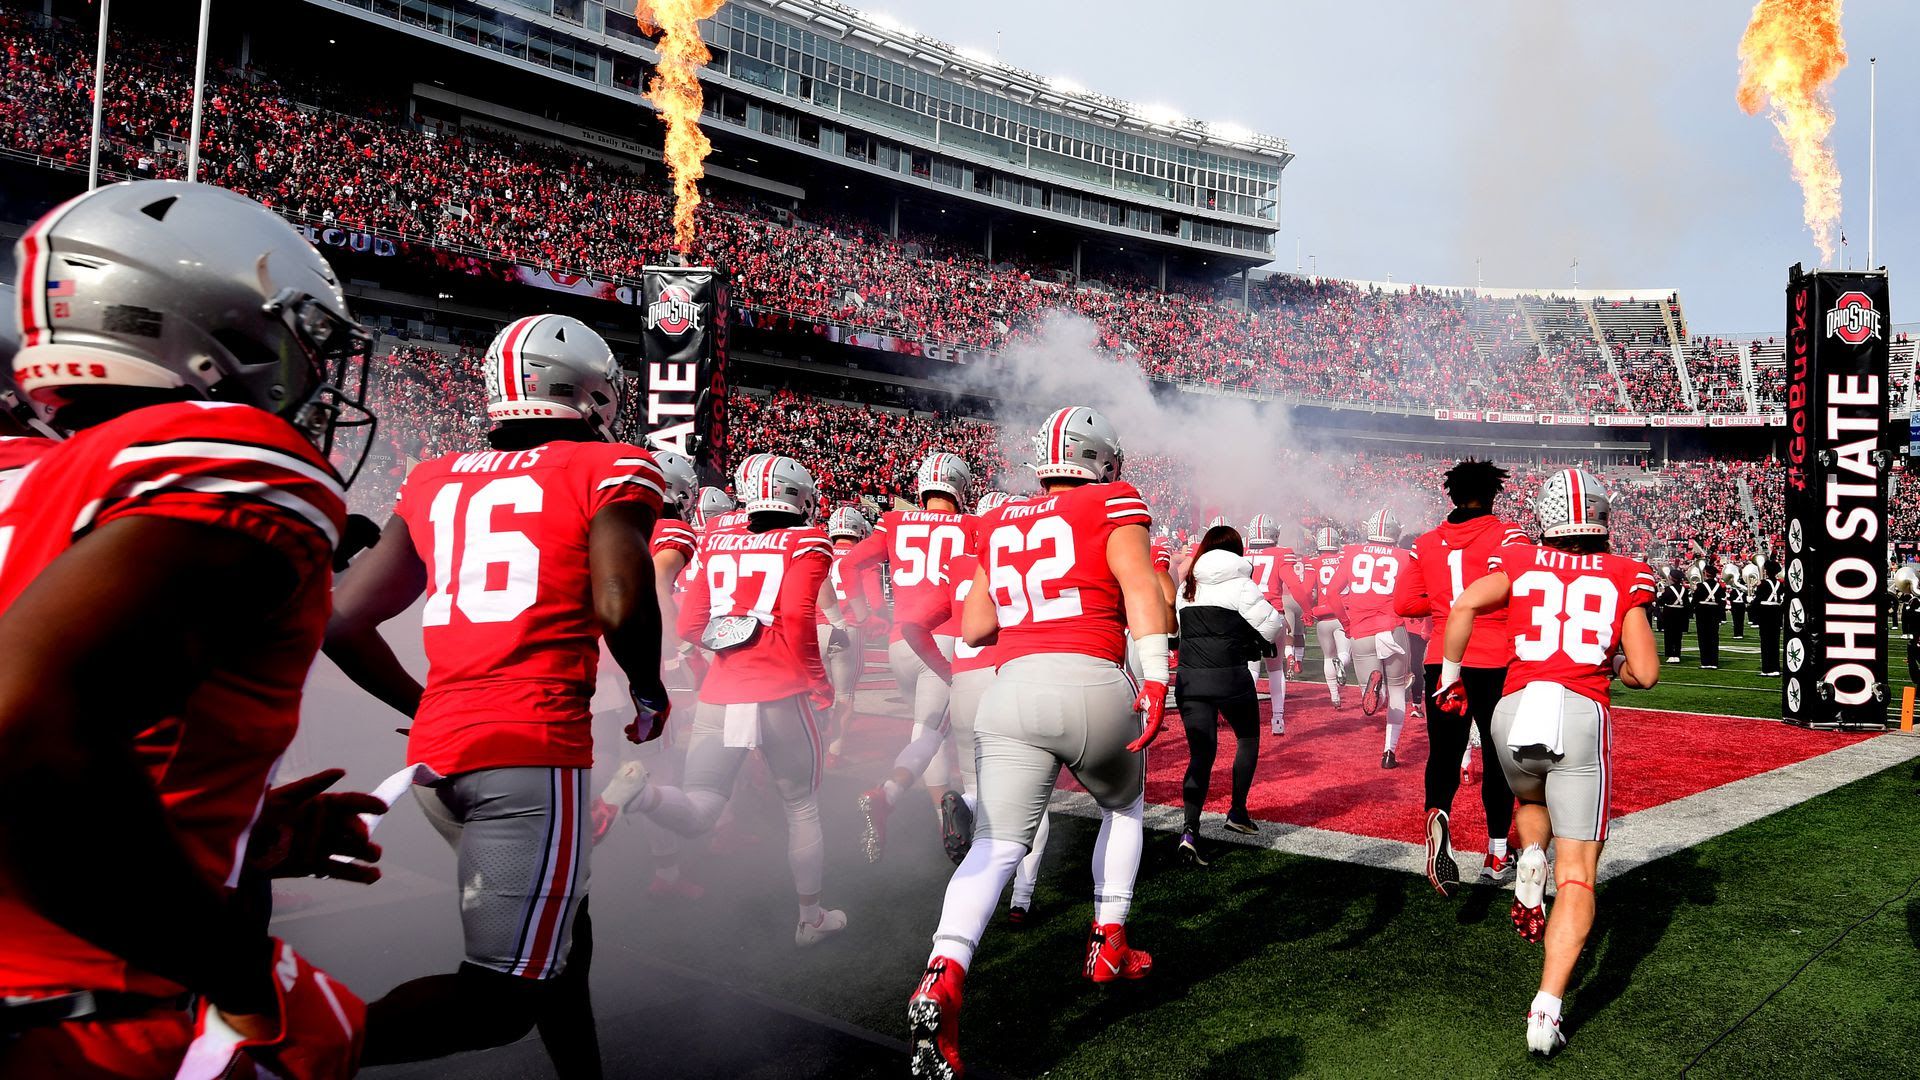 Ohio State takes the field against Michigan State on Nov. 20 by running through a smoke machine.